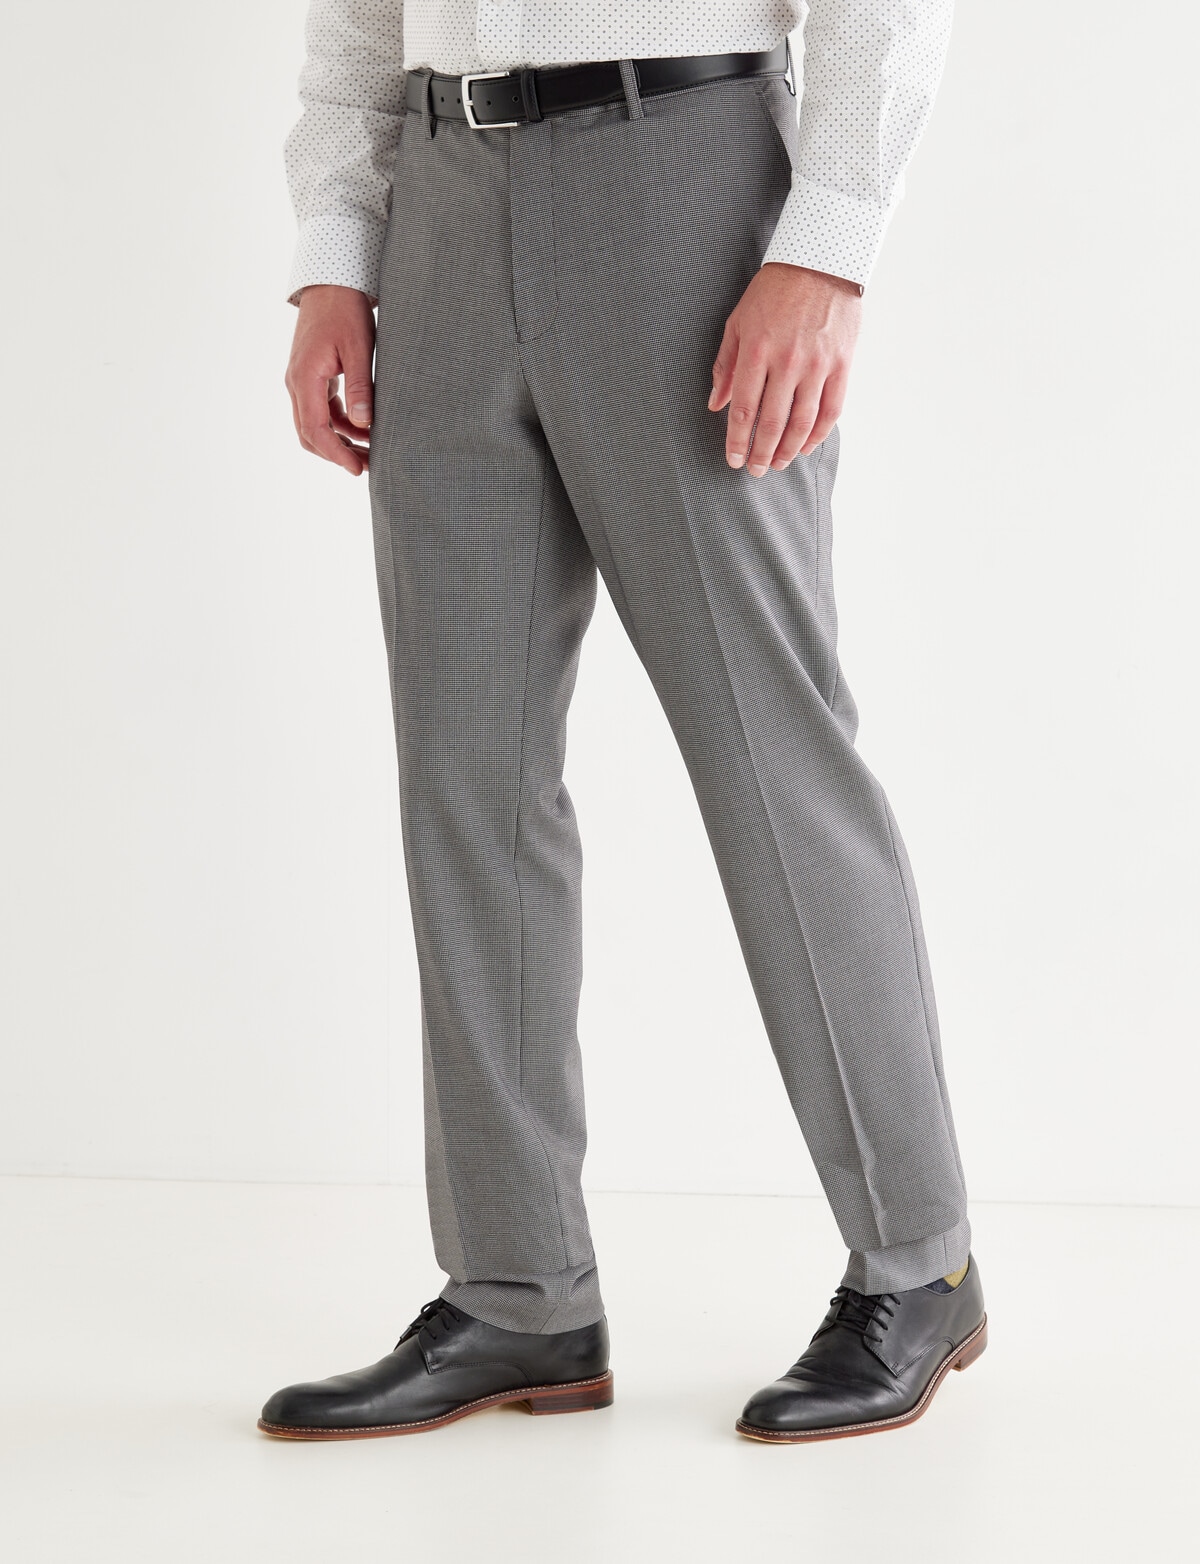 Chisel Tailored Puppytooth Flat Front Pant, Light Grey - Suit Jackets ...